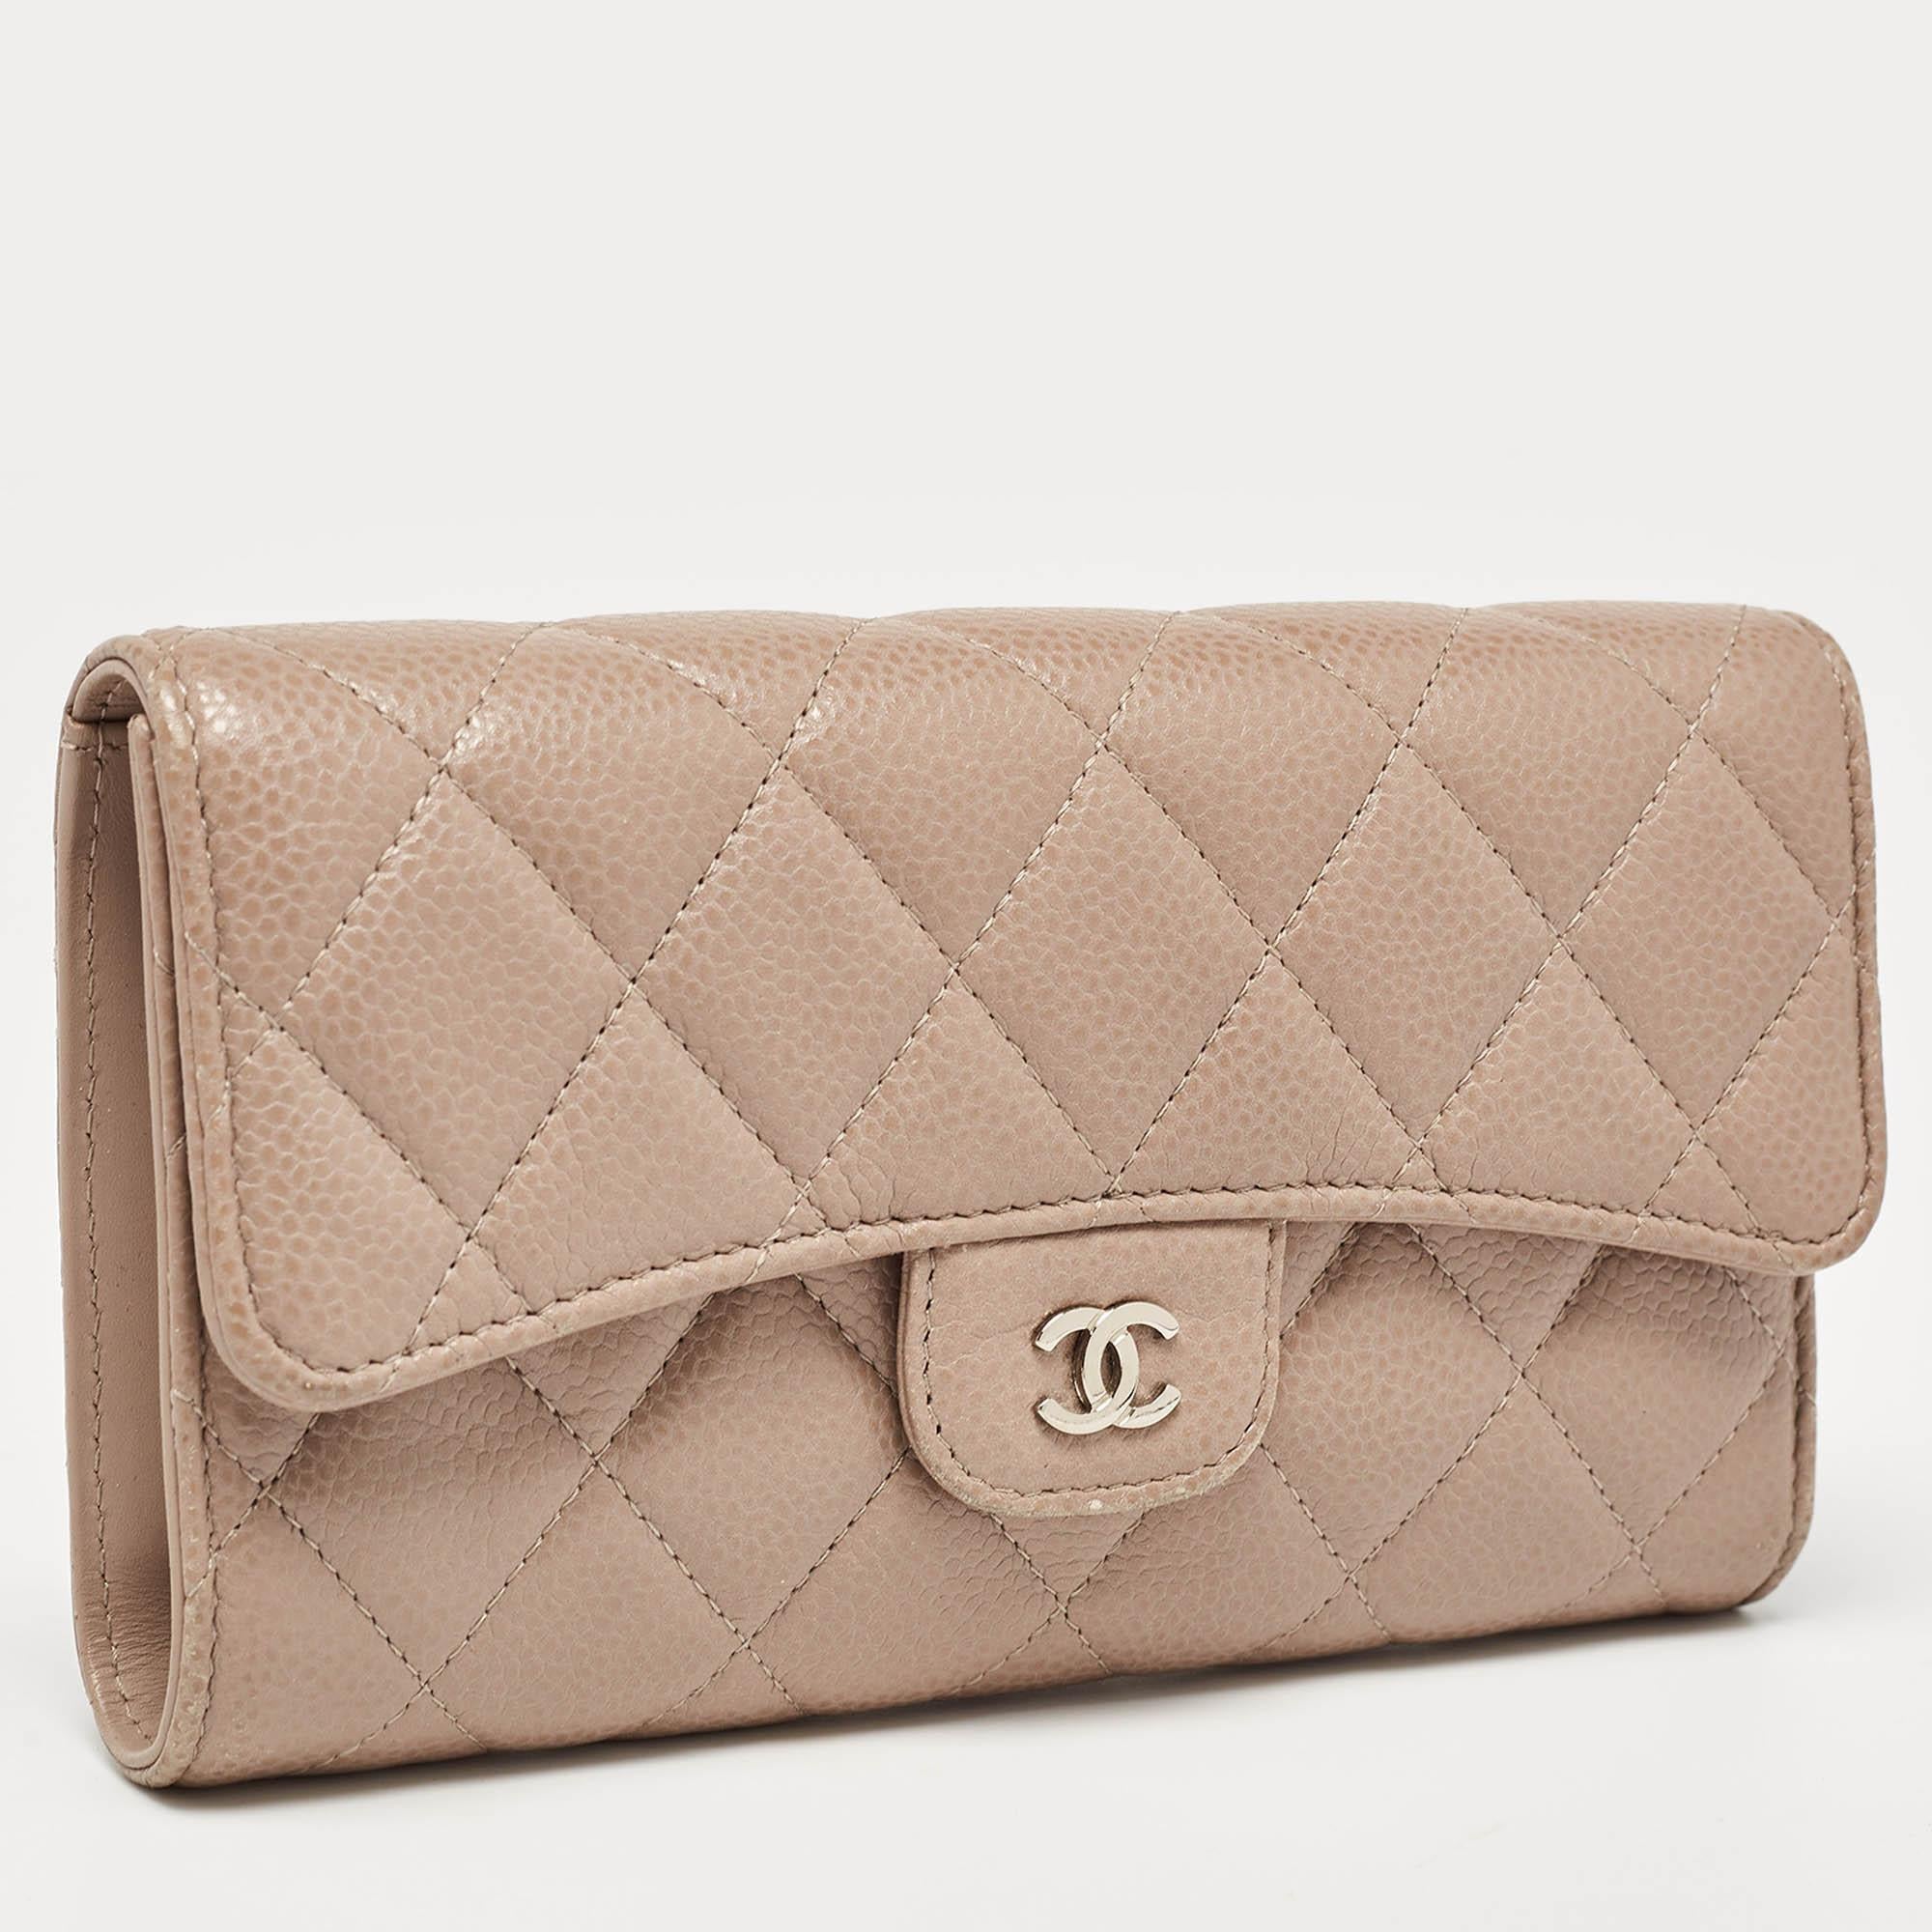 Chanel Beige Quilted Caviar Leather CC Trifold Continental Wallet In Good Condition For Sale In Dubai, Al Qouz 2